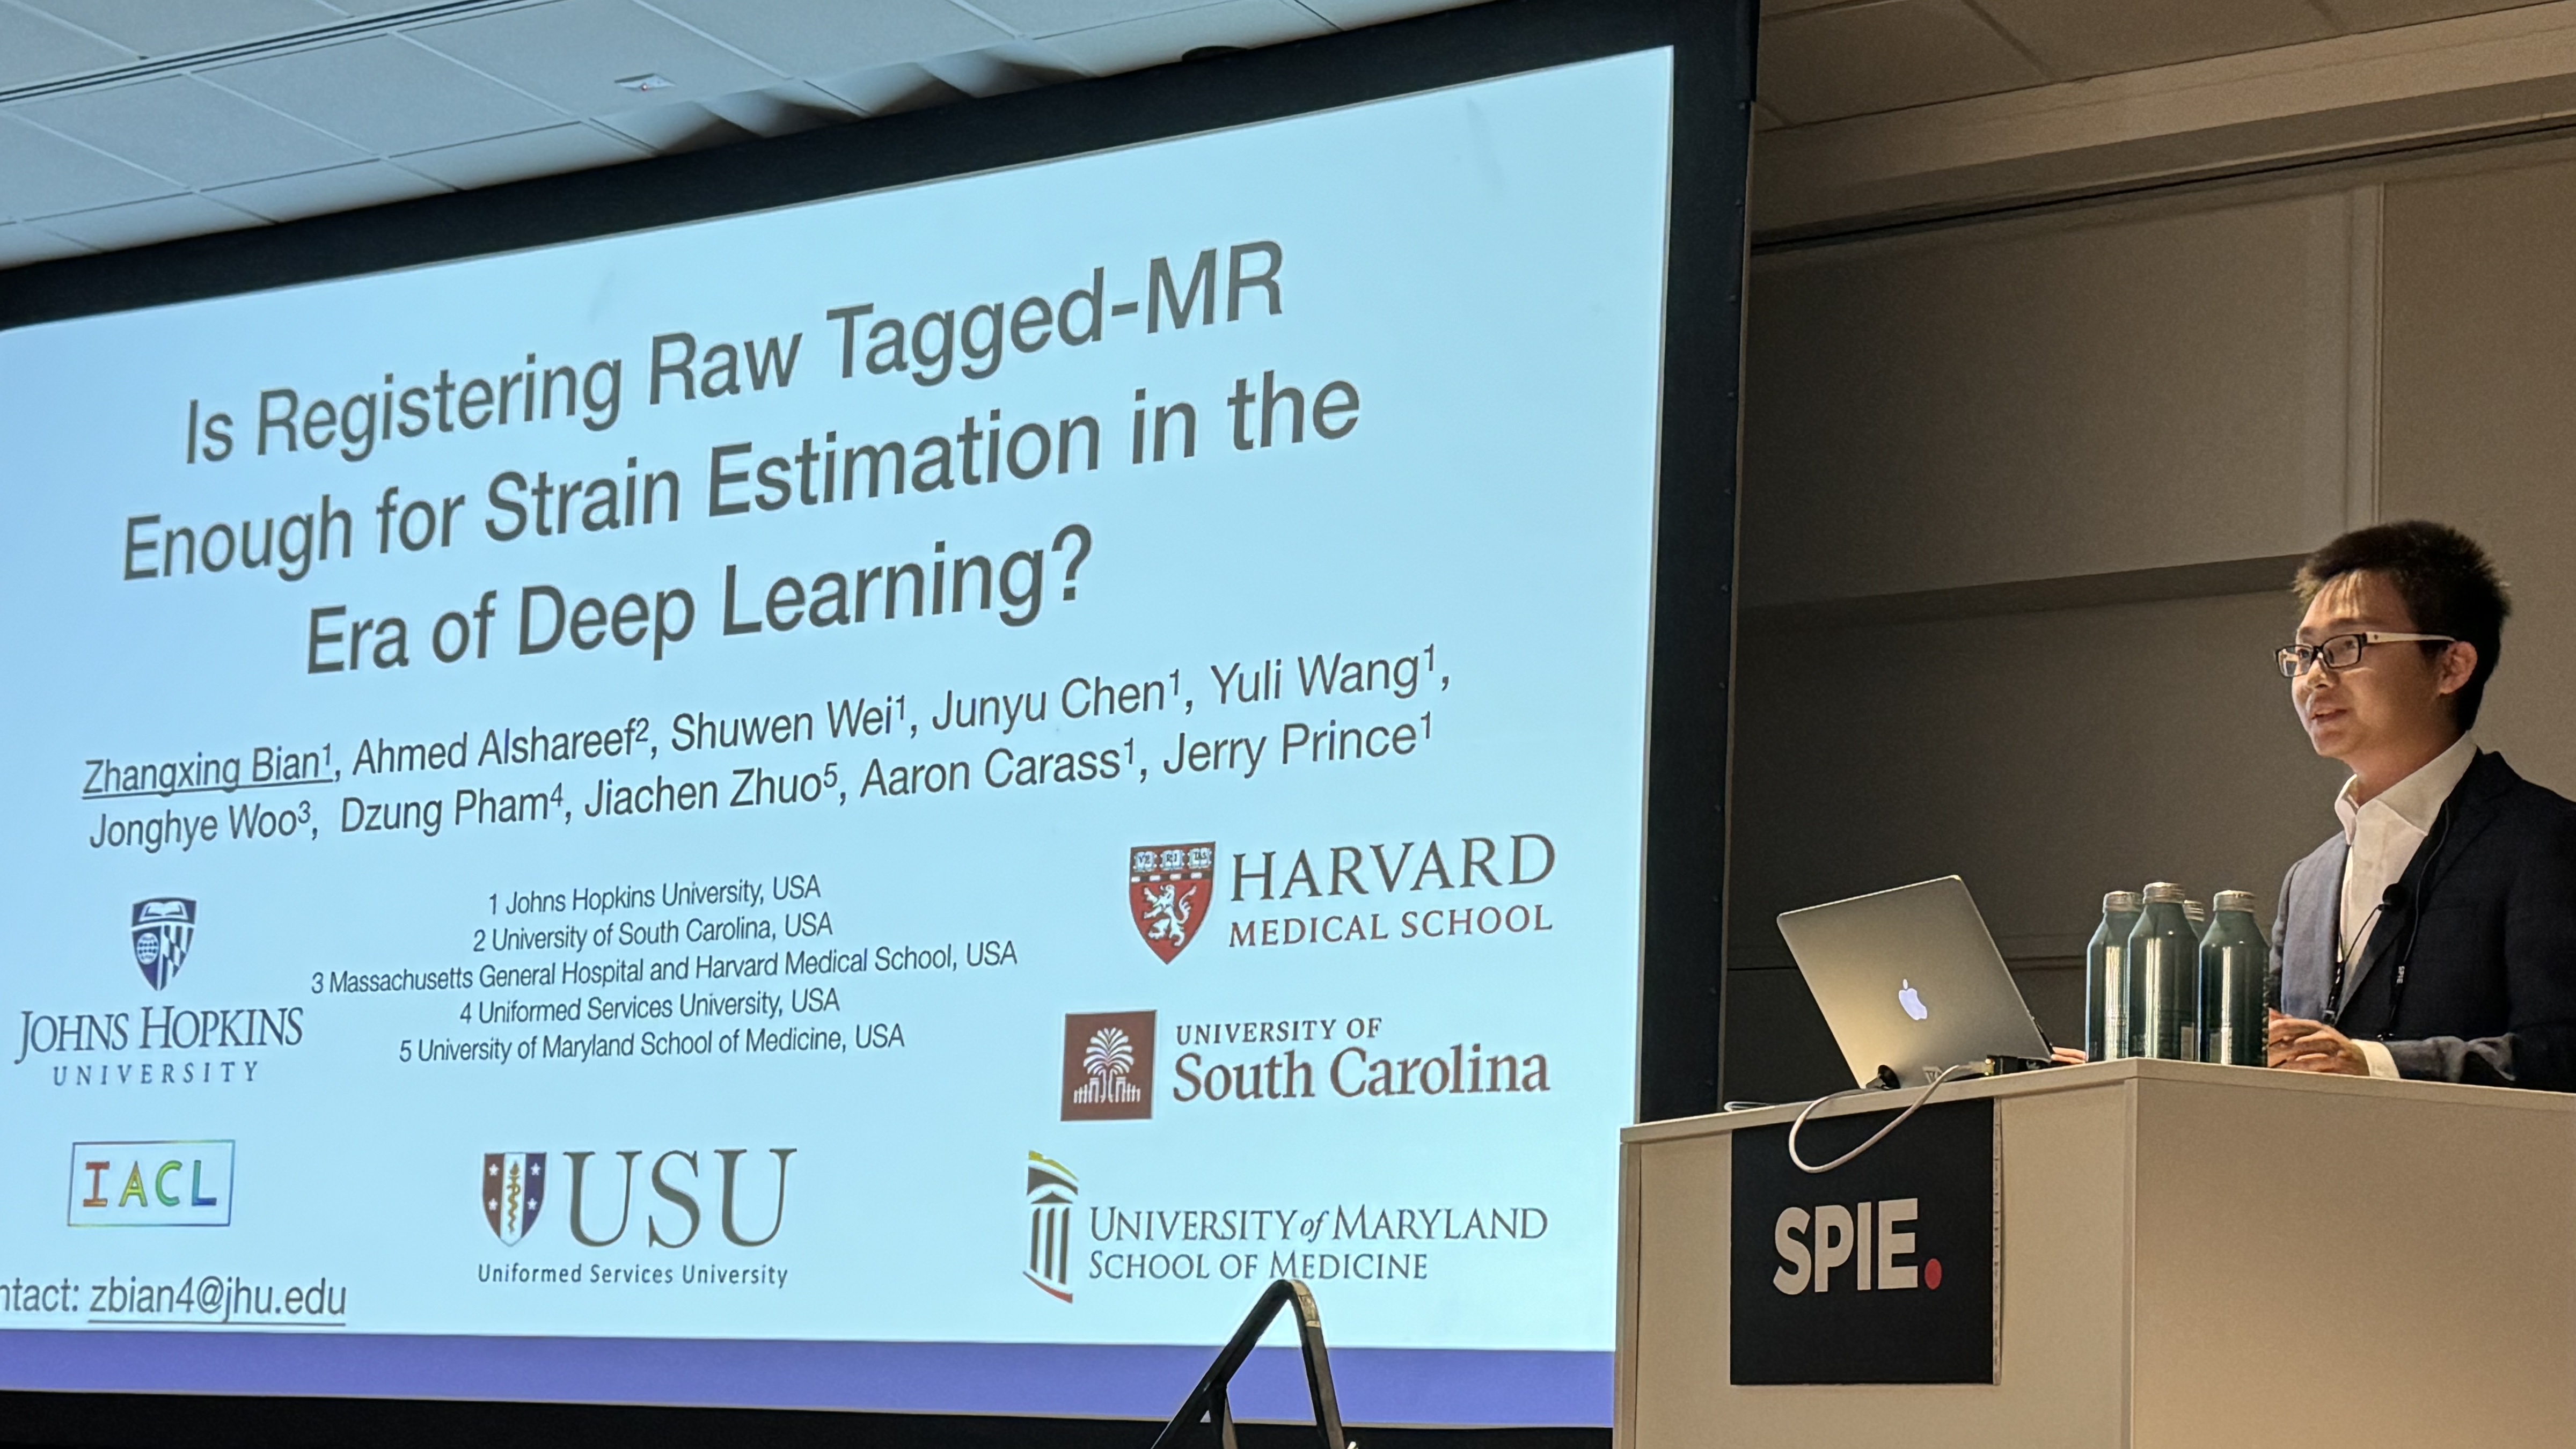 Zhangxing Bian presenting his award winning paper "Is Registering Raw Tagged-MR Enough for Strain Estimation in the Era of Deep Learning?" at the Proceedings of SPIE Medical Imaging (SPIE-MI 2024), San Diego, CA, February 18–22, 2024.